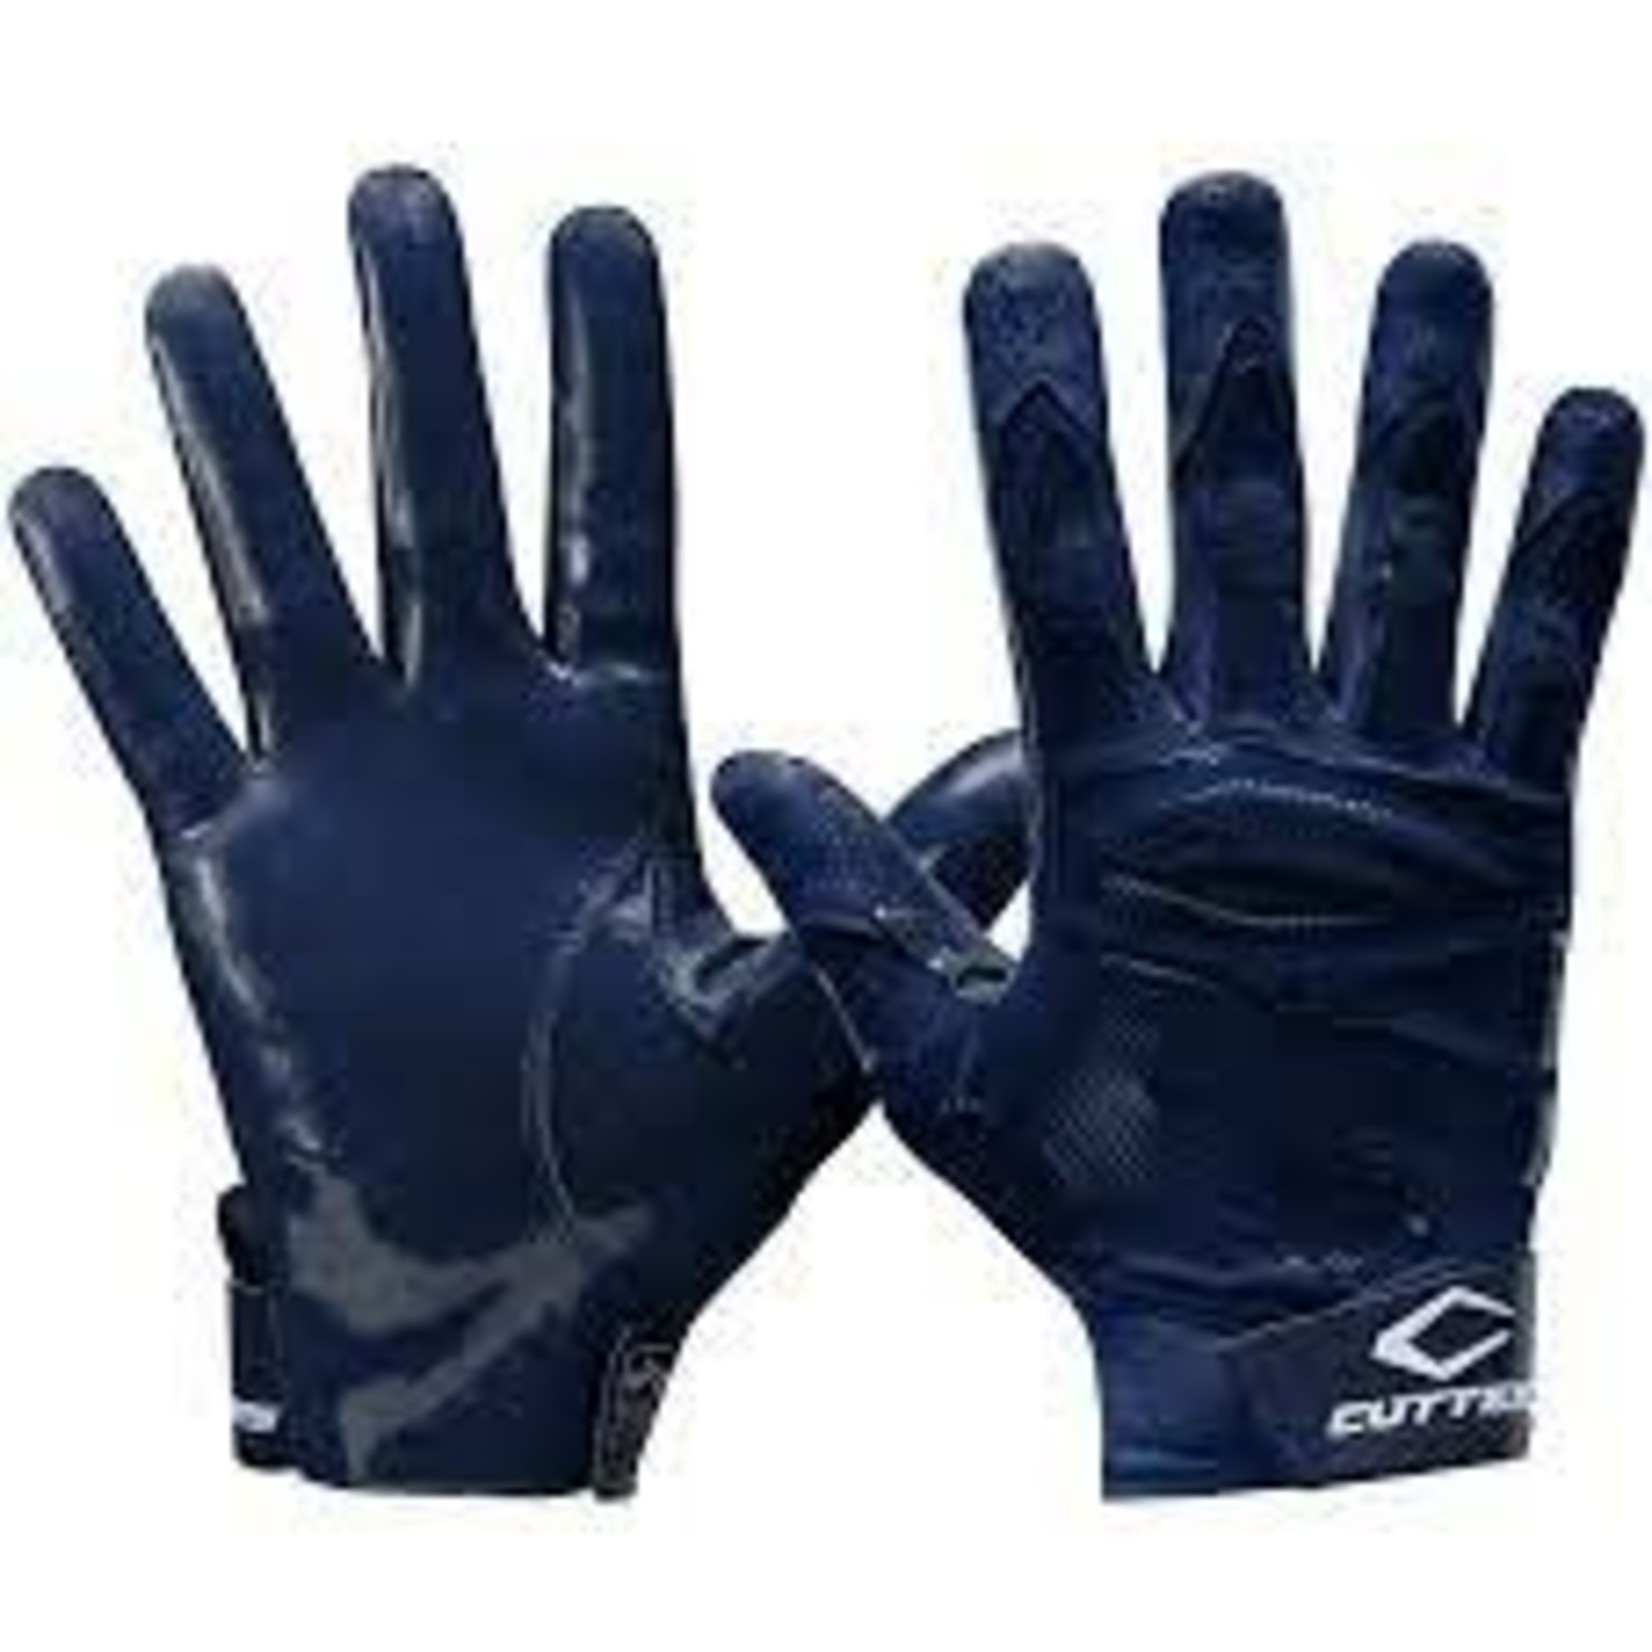 Cutters Cutters Rev Pro 4.0 Receivers Gloves